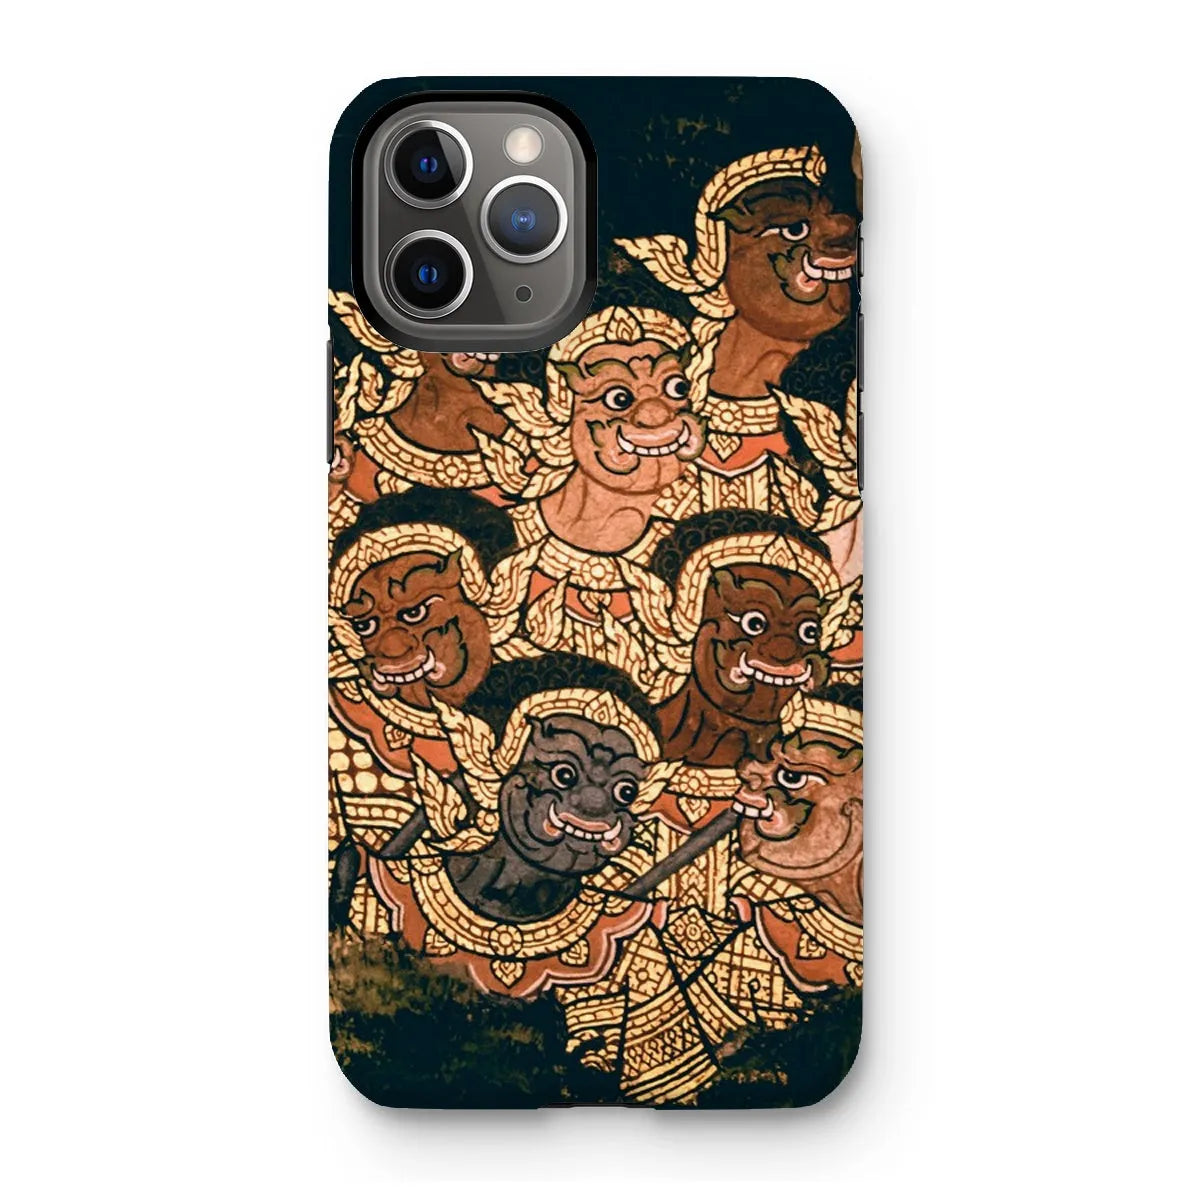 Babes In The Woods - Traditional Thai Myth Phone Case - Iphone 11 Pro / Matte - Mobile Phone Cases - Aesthetic Art